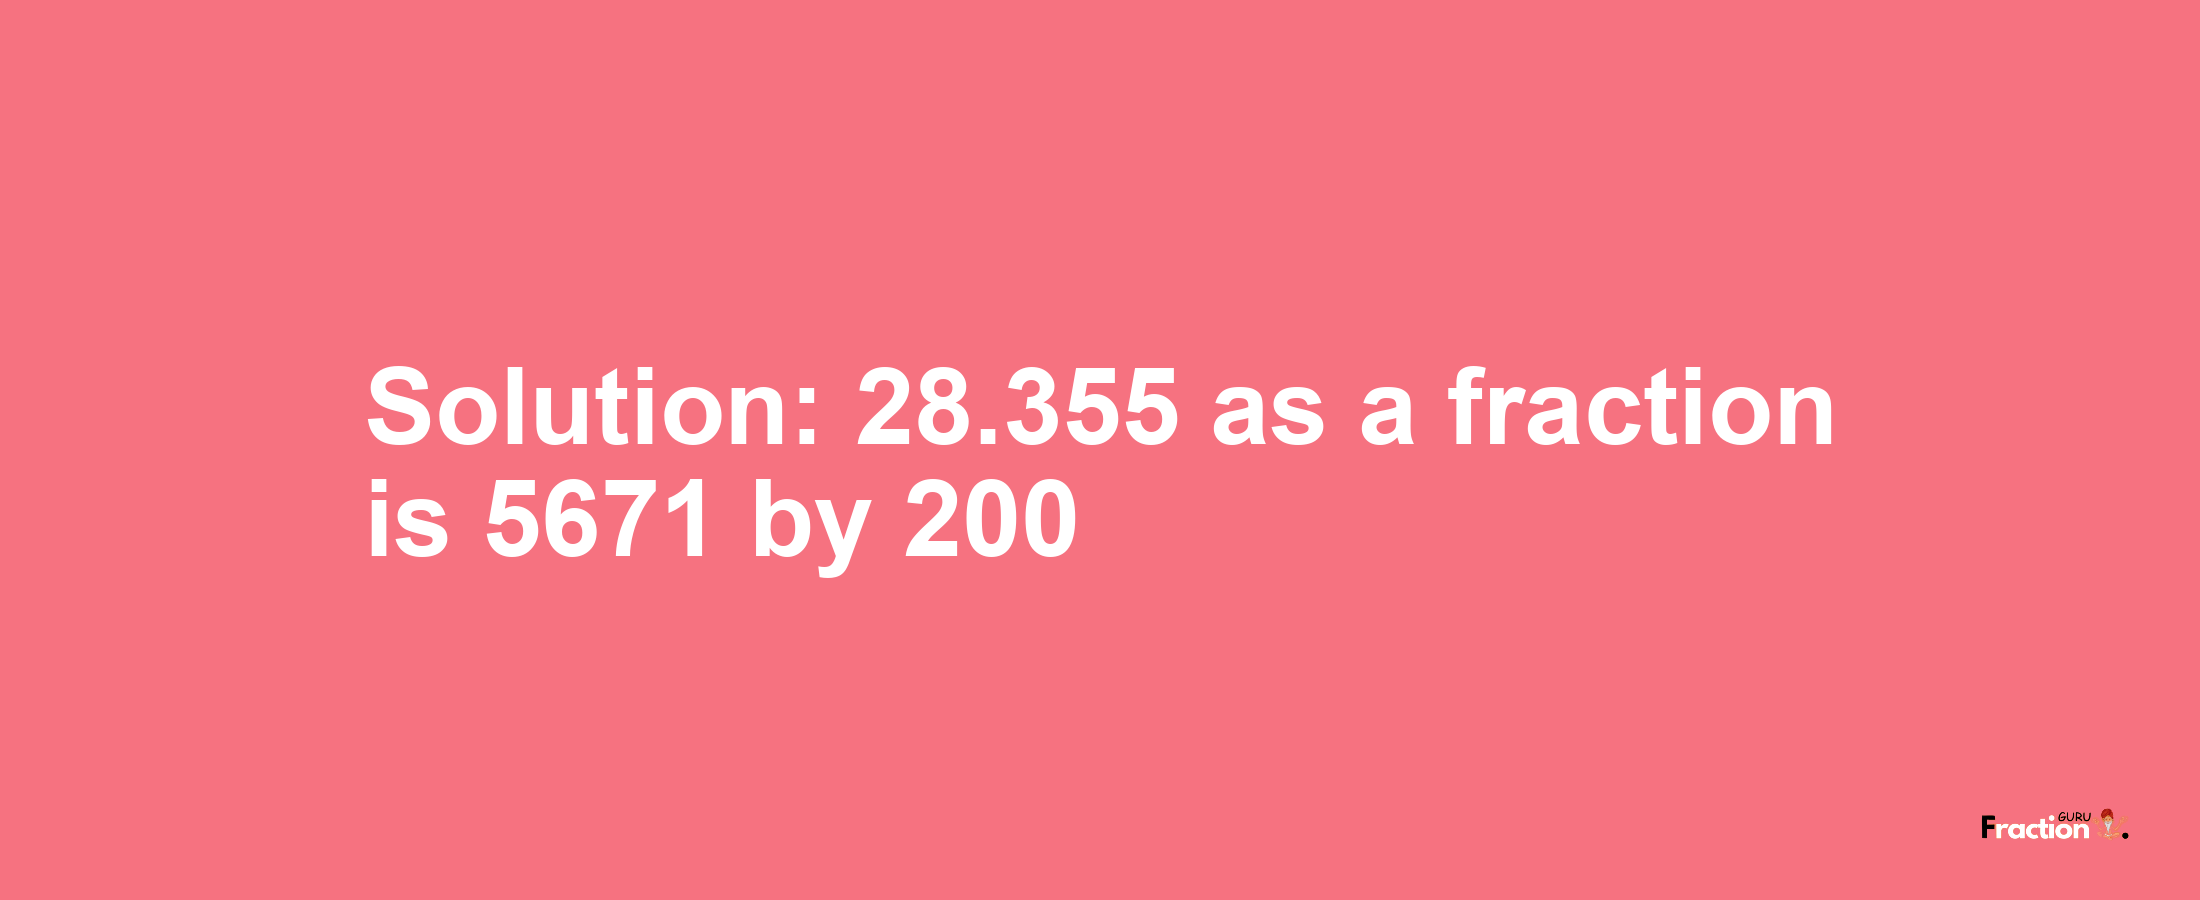 Solution:28.355 as a fraction is 5671/200